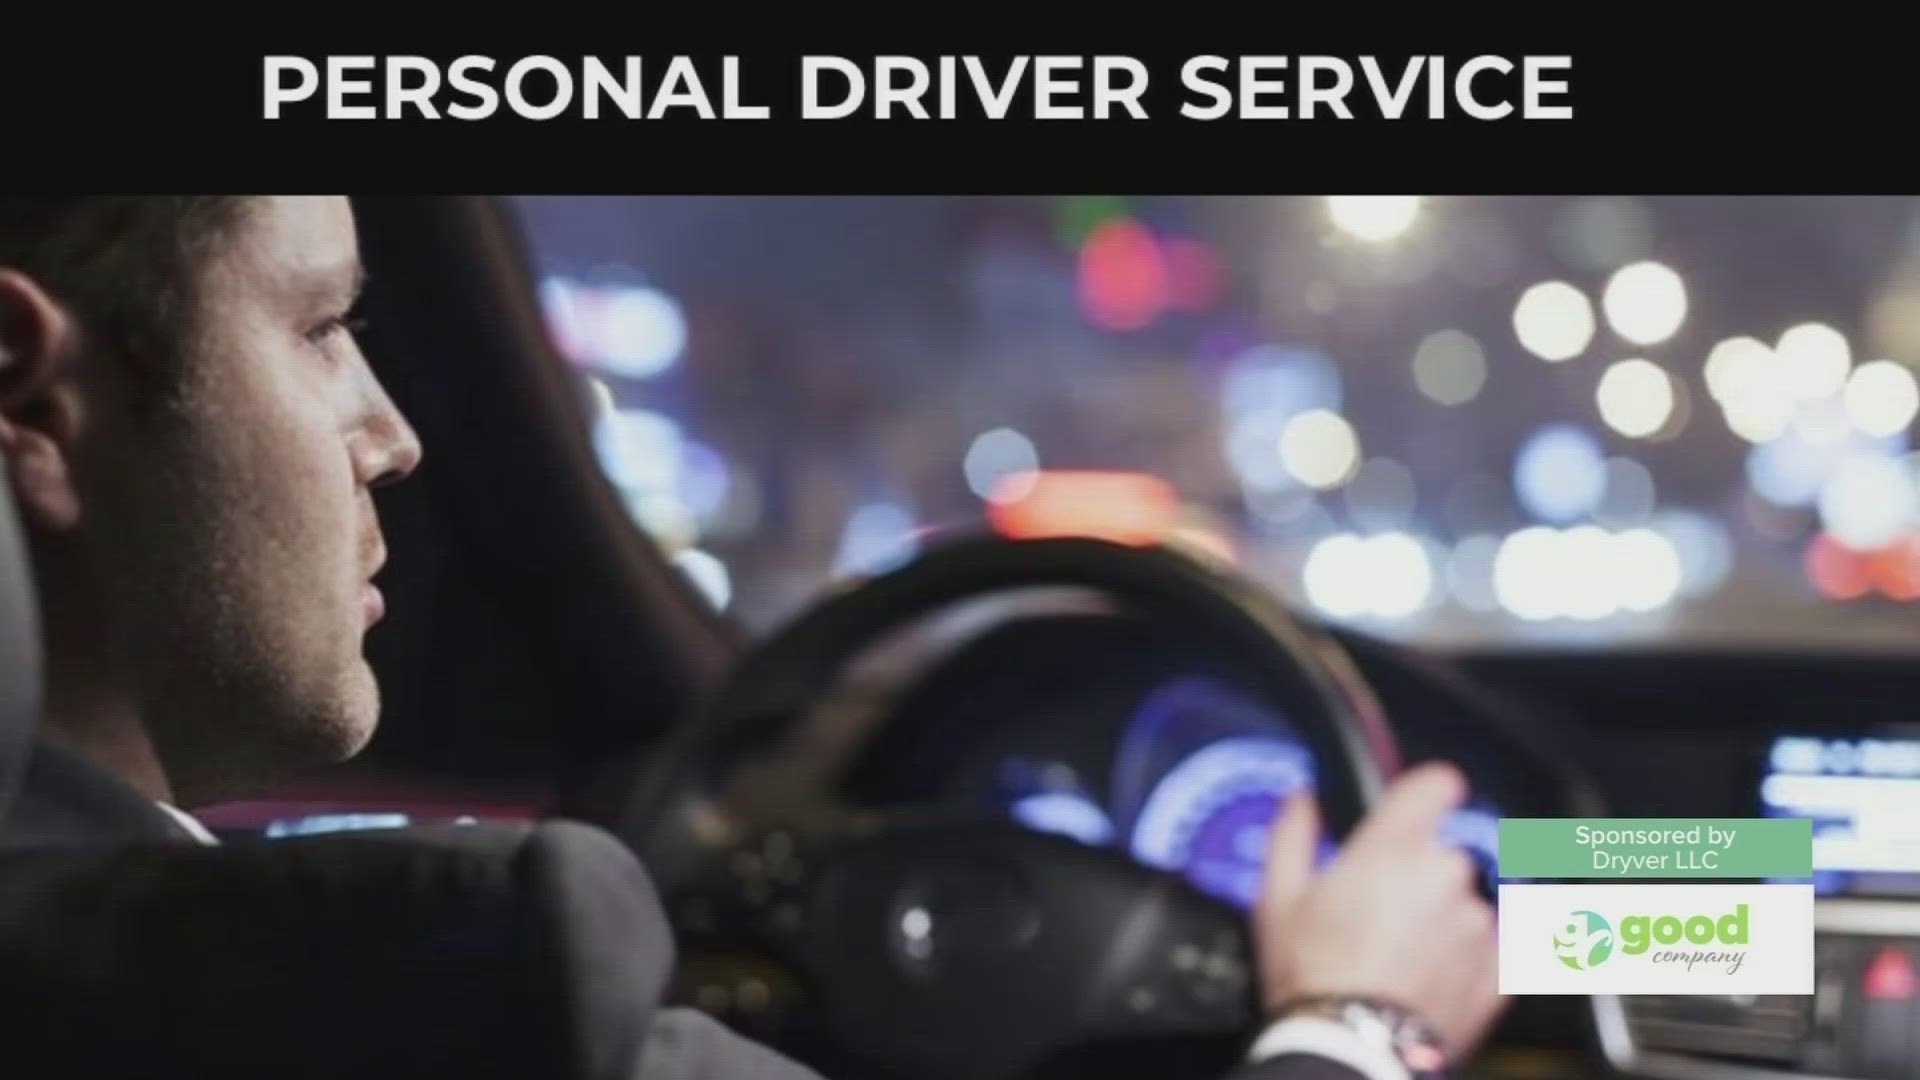 Joe talks with Alexa Milkovich about a service that can help you get safely to wherever you need to go, from the comfort of your own car! Sponsored by: Dryver